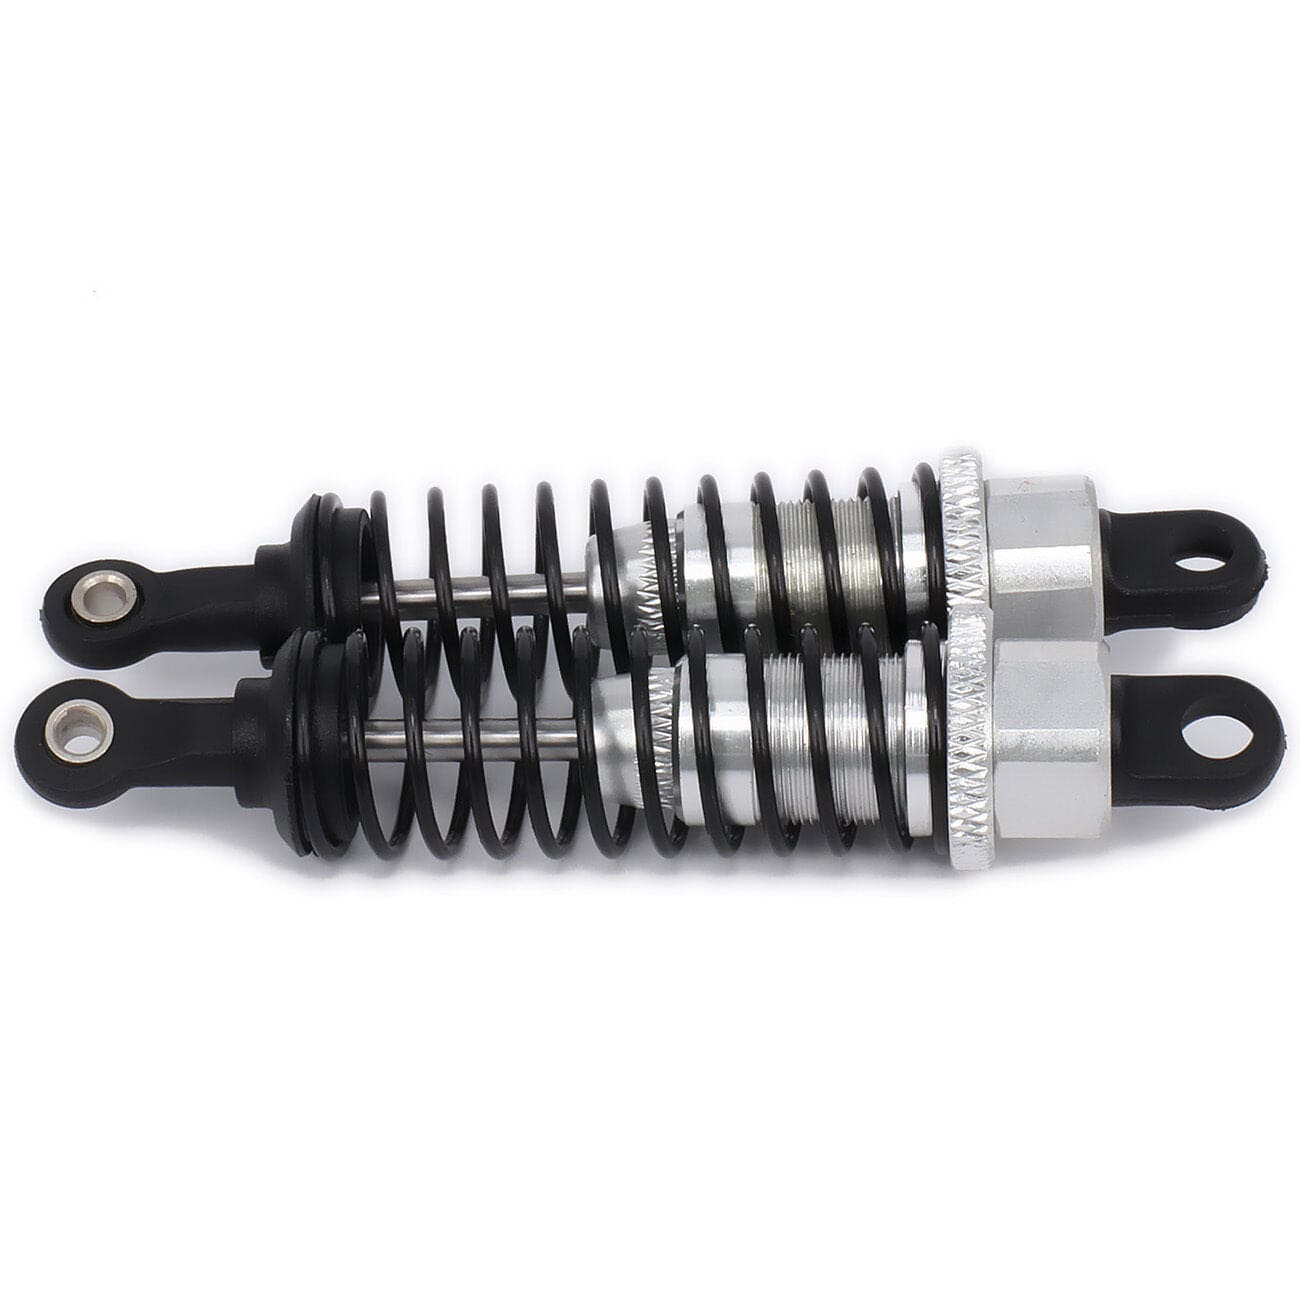 RCAWD RC CAR UPGRADE PARTS Silver RCAWD 70mm Shock Absorber Damper Oil Adjustable 2PCS For Rc Car 1/16 Model Car